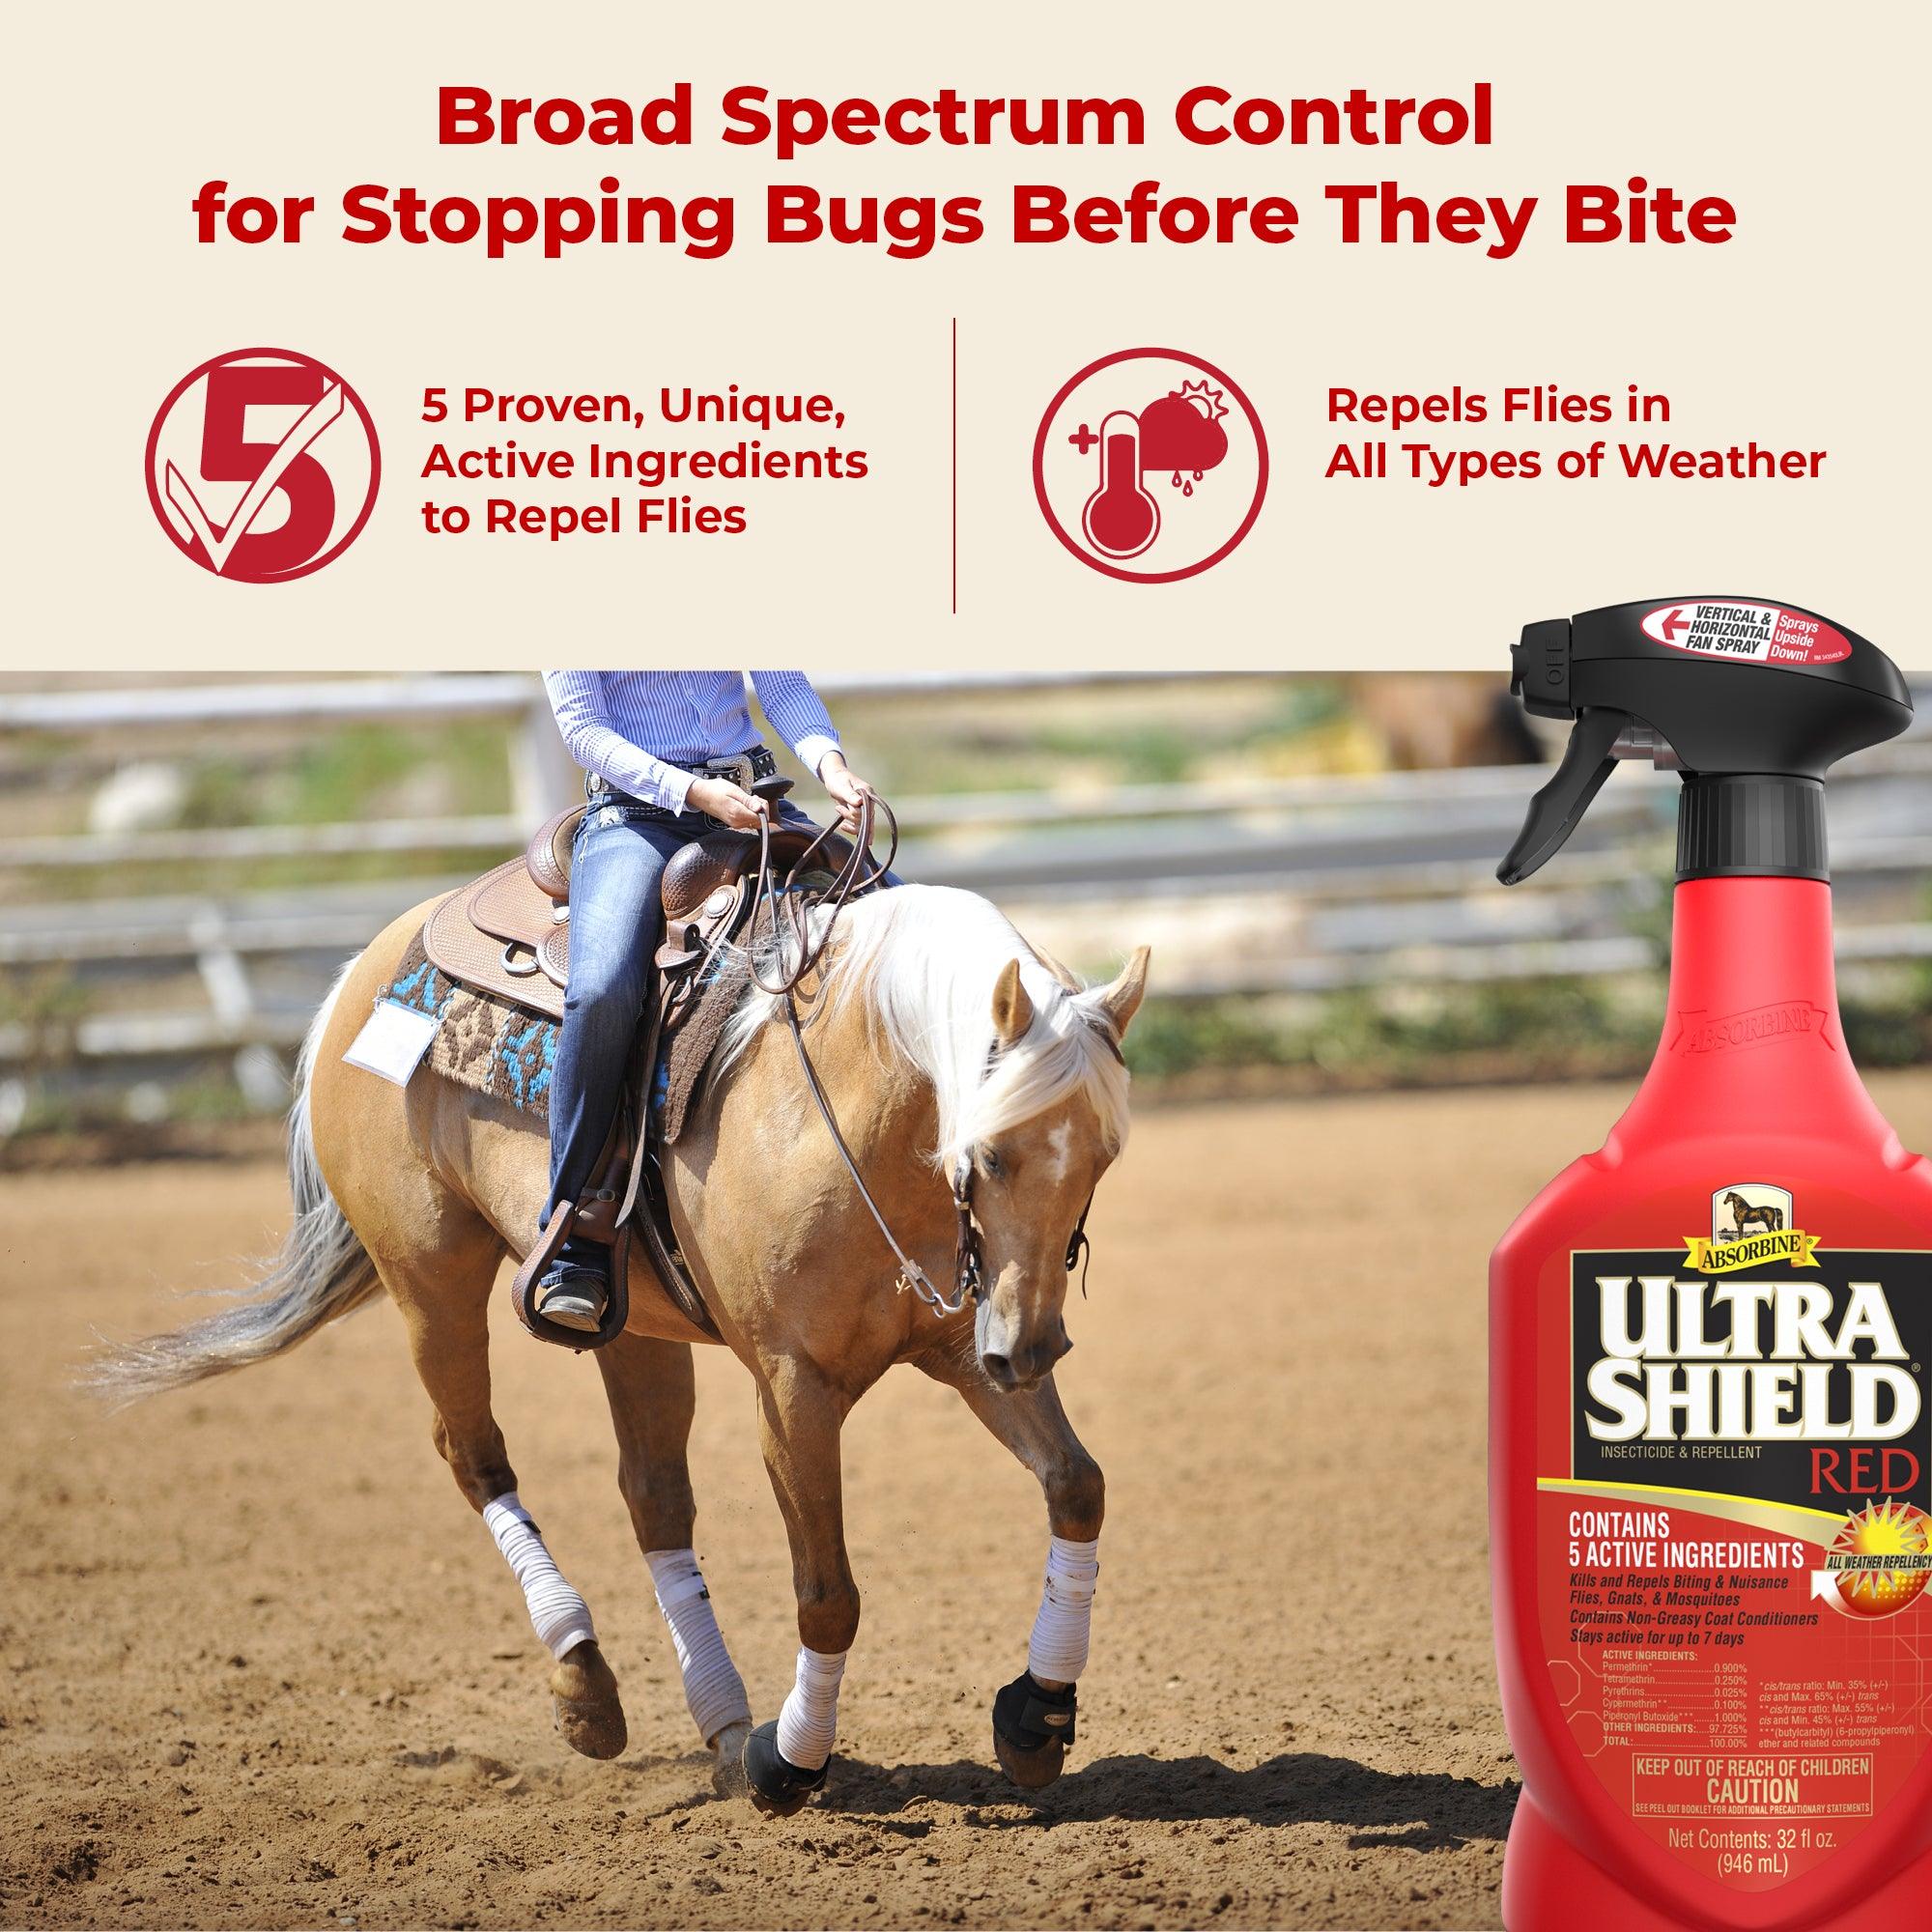 Woman in blue jeans riding a fawn colored horse.  UltraShield Red offers a broad spectrum control for stopping bugs before they bite.  Five proven, unique, active ingredients to repel flies.  Repels flies in all types of weather.